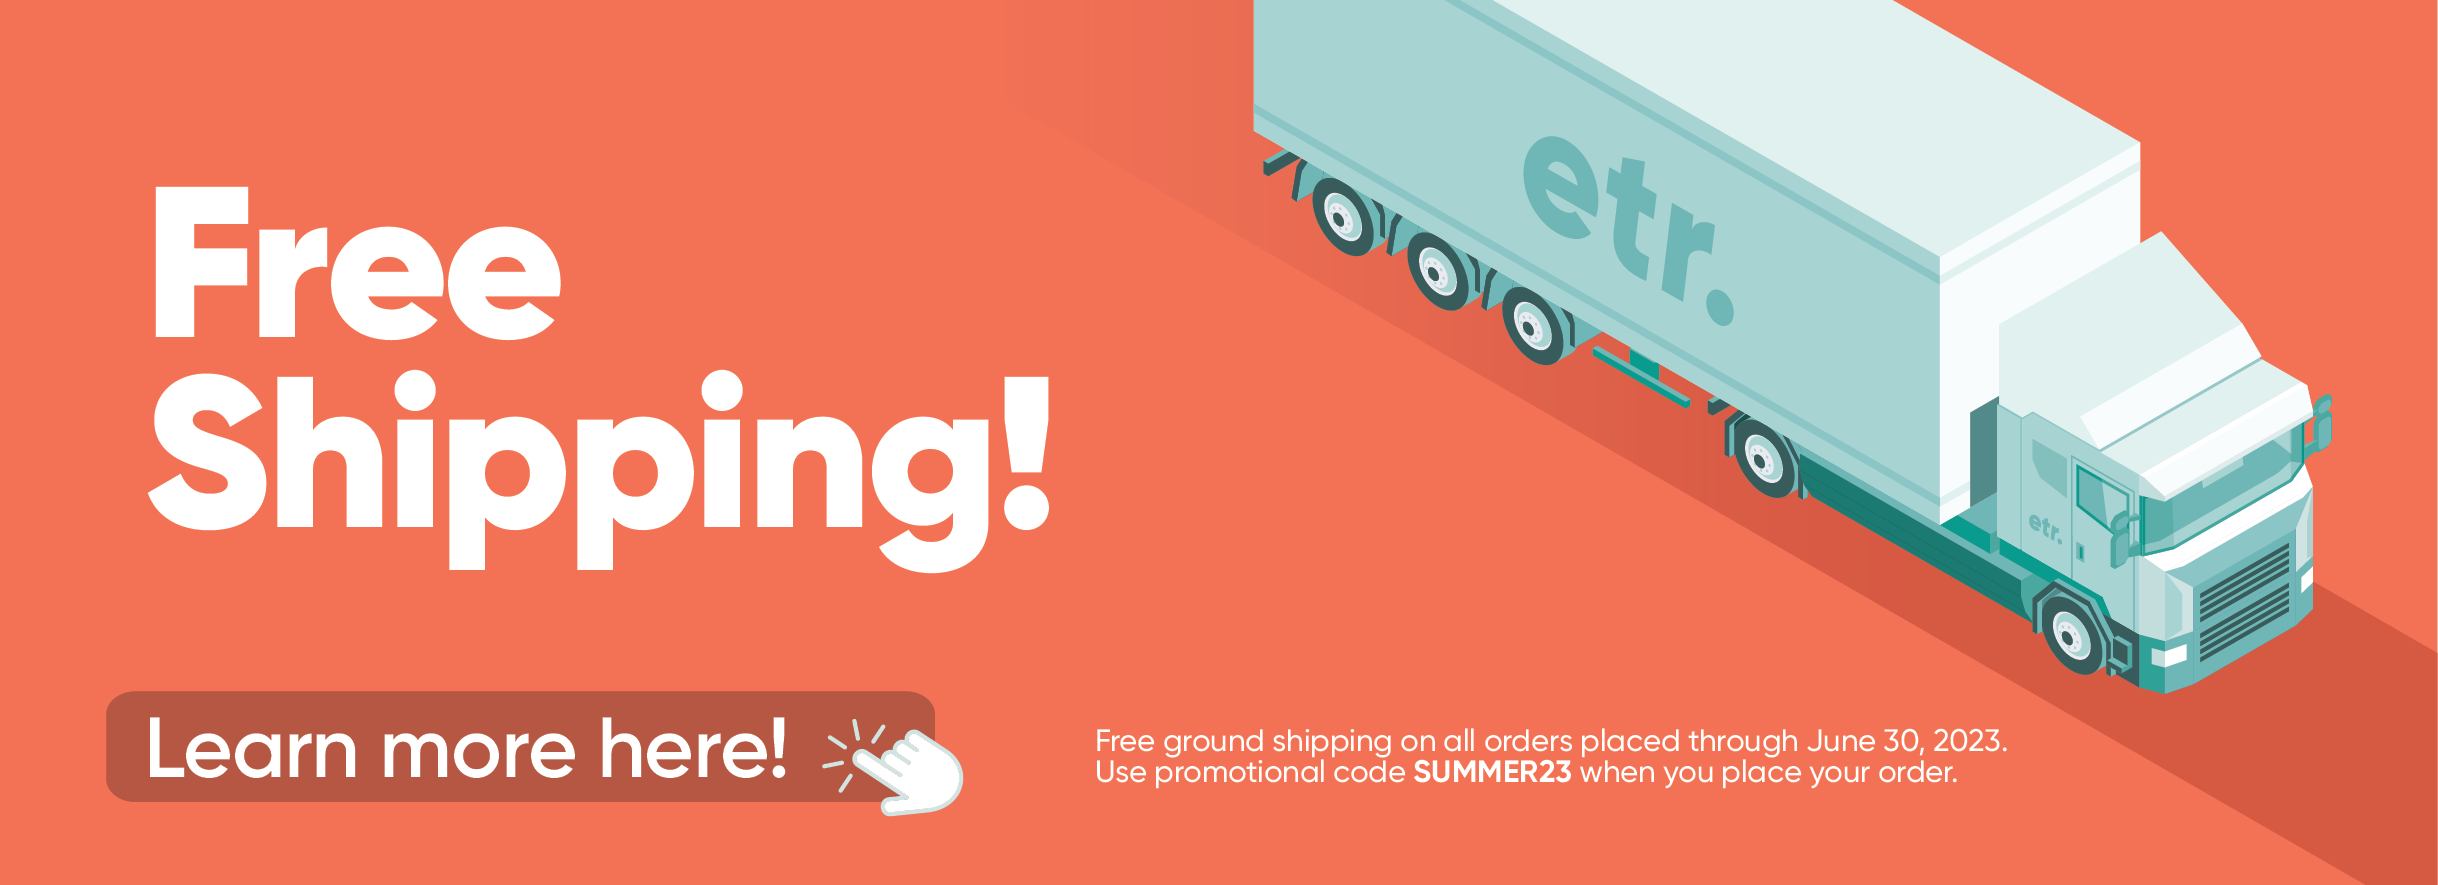 Free Shipping! Free ground shipping on all orders placed through June 30, 2023. Use promotional code SUMMER23 when you place an order. Learn more here!